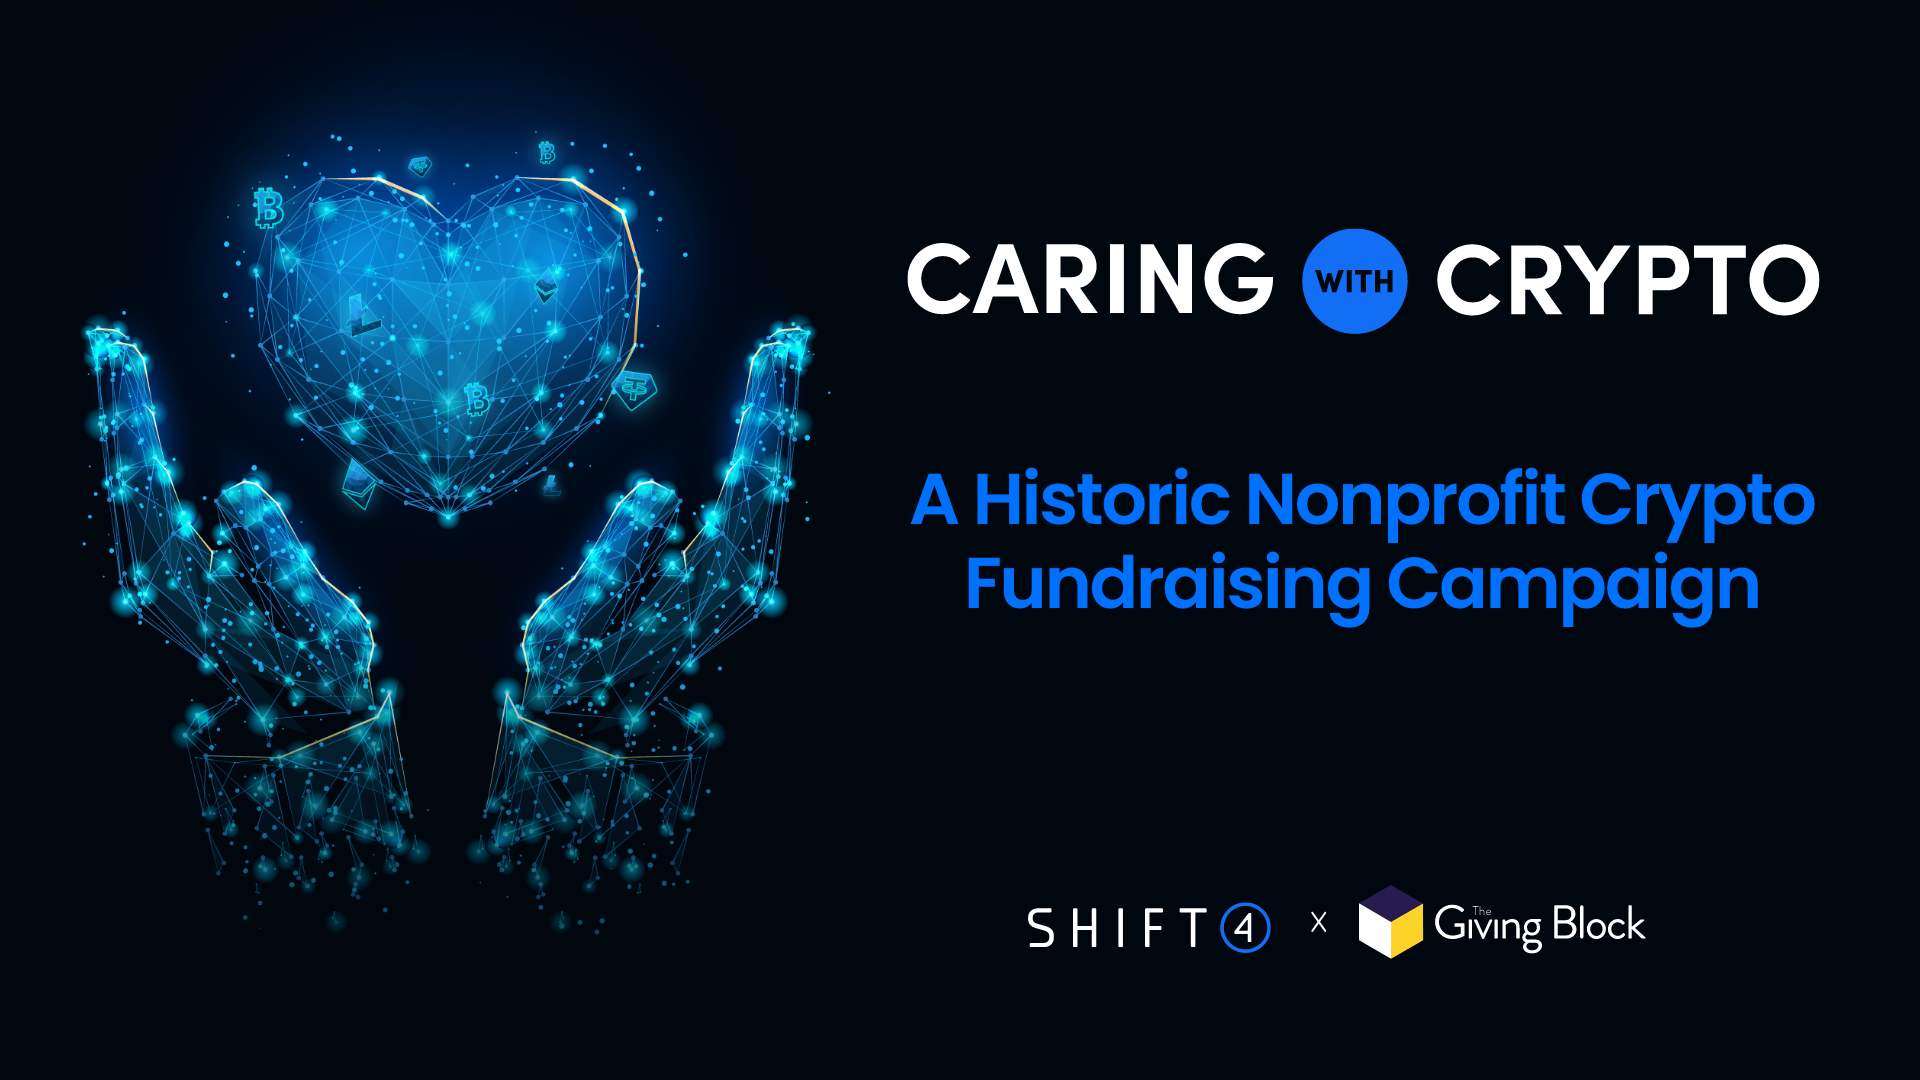 CARING WITH CRYPTO - SHIFT 4 | THE GIVING BLOCK